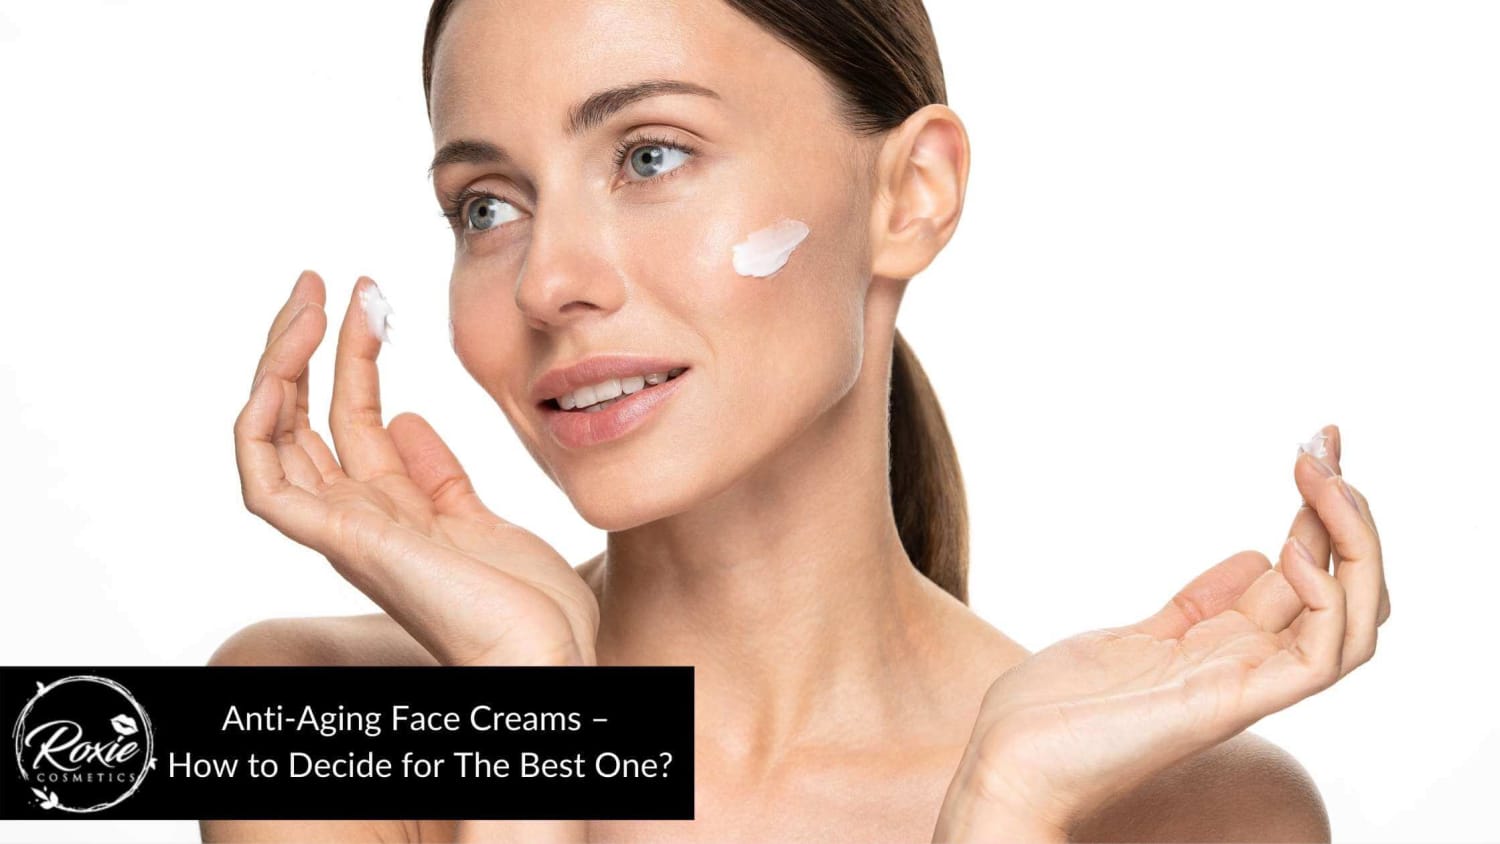 Anti-Aging Face Creams – How to Decide for The Best One?